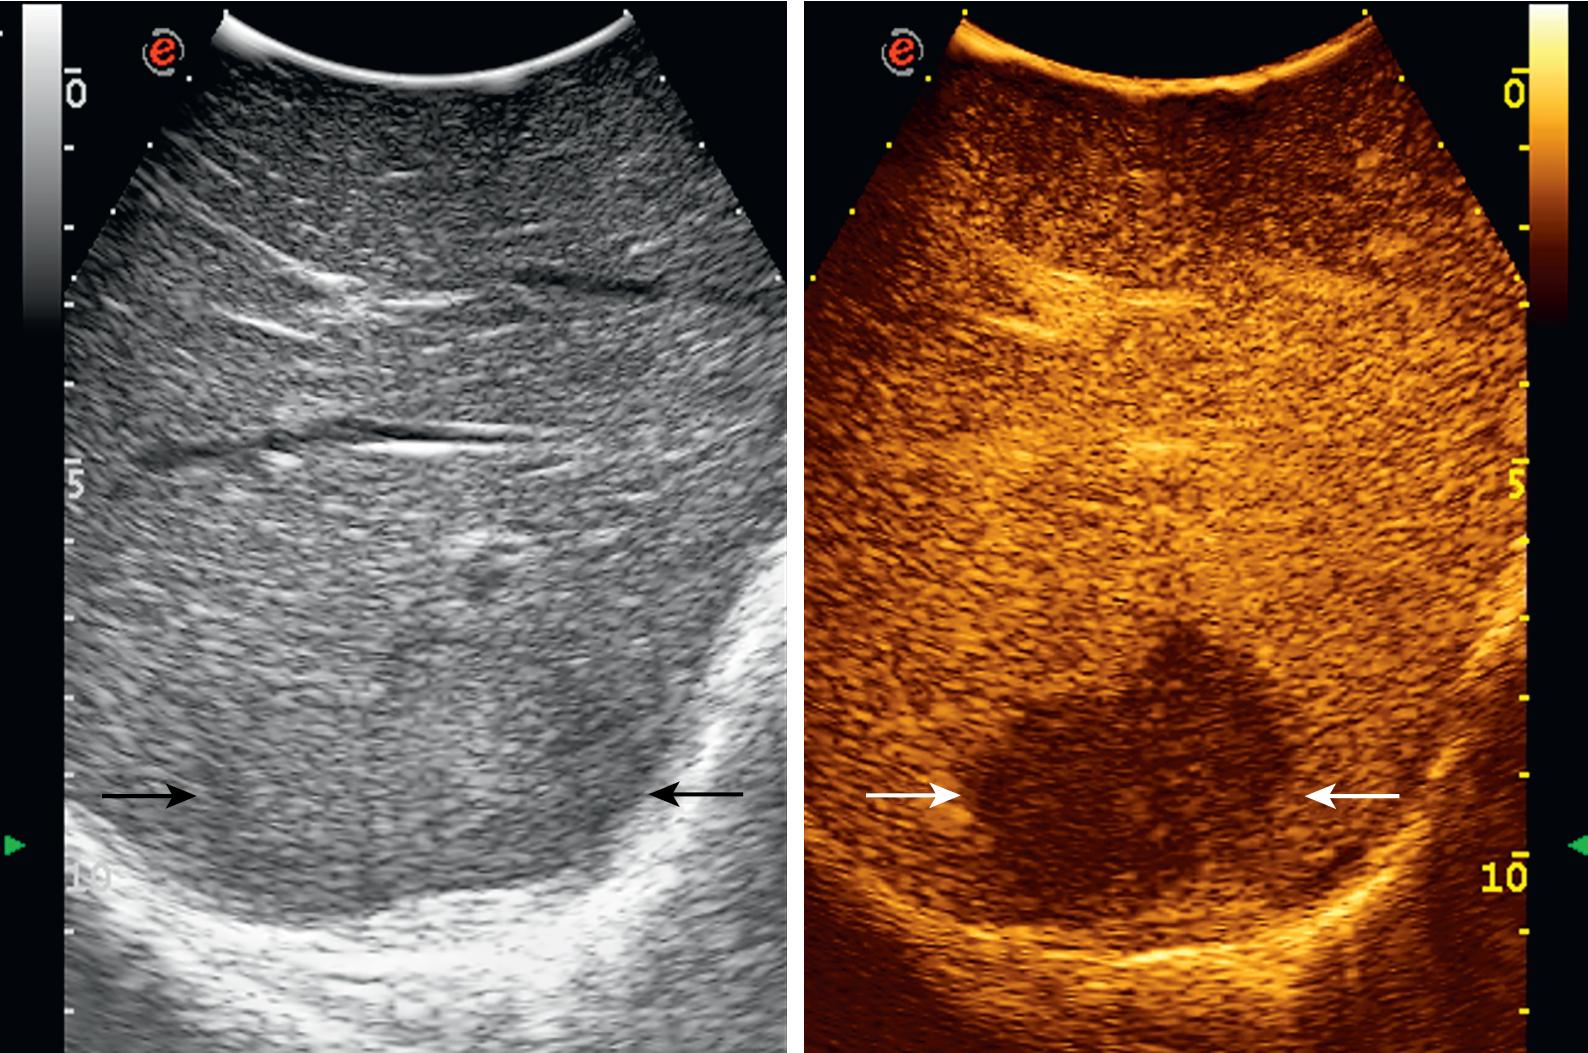 FIGURE 103.25, On the left this relatively large metastatic lesion is substantially isoechoic (black arrows) compared with the surrounding liver parenchyma. On the right, during portal phase, the lesion is clearly visible (white arrows), showing the so-called “black hole” effect.